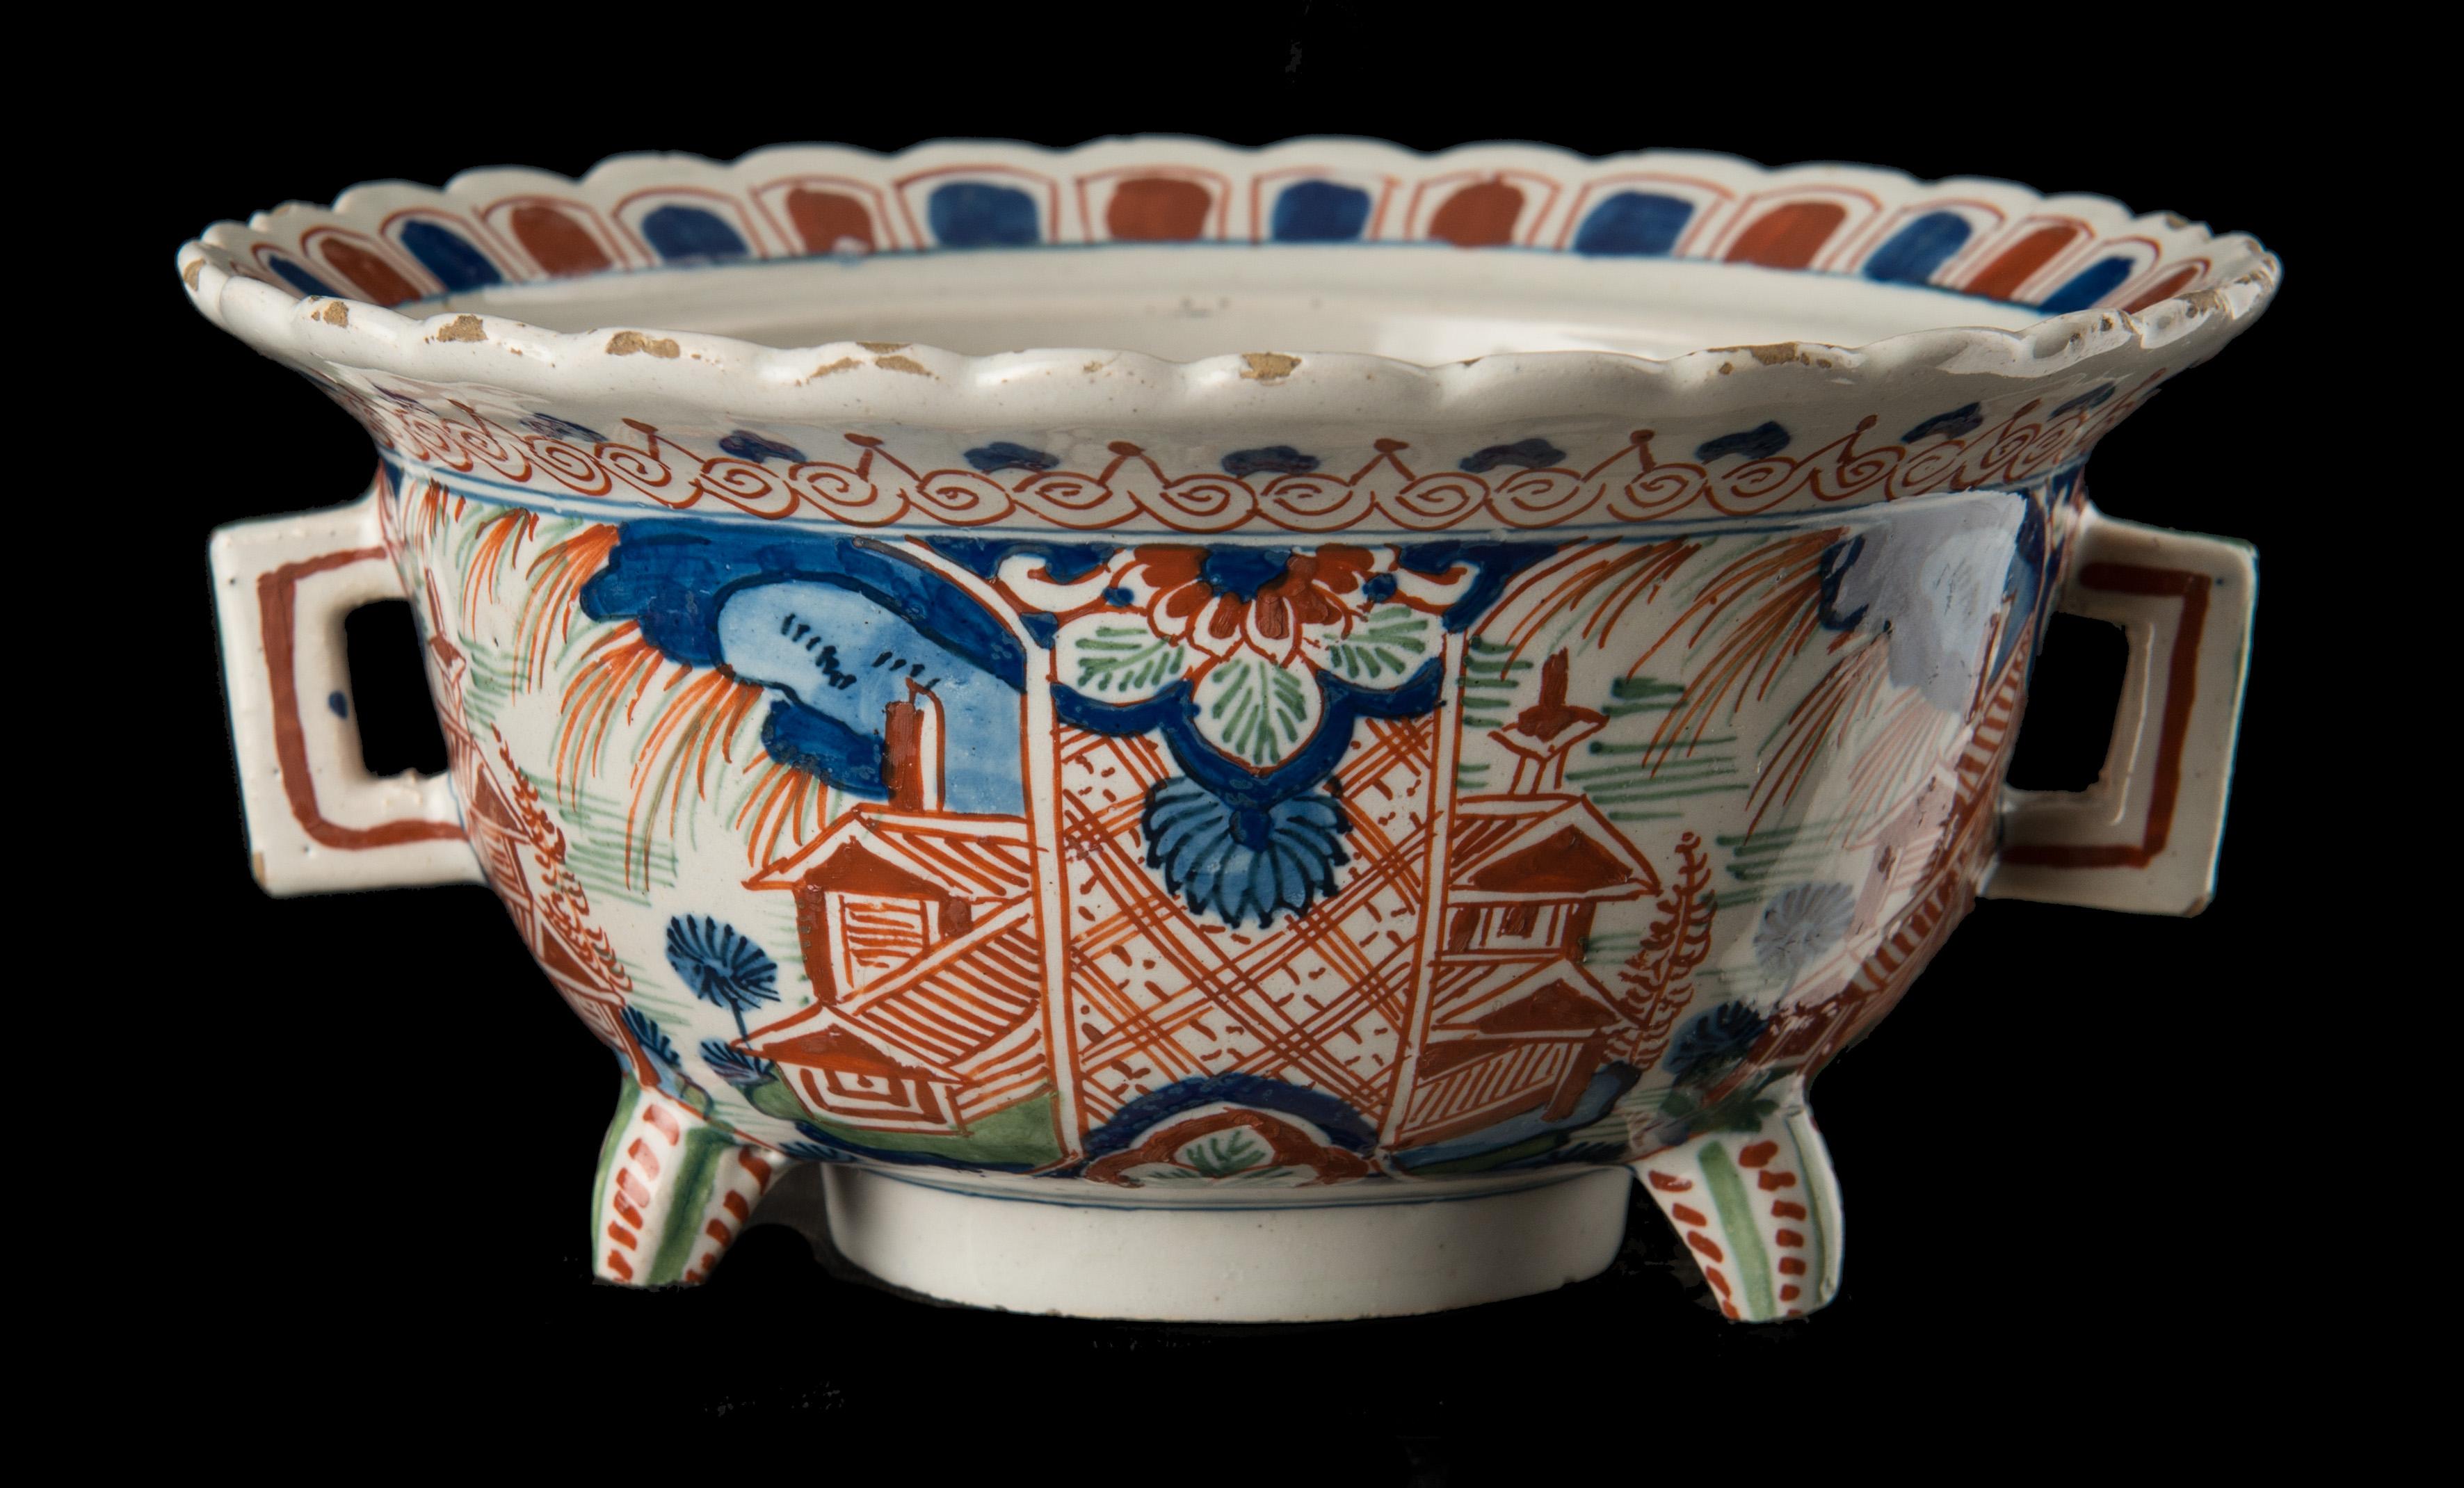 Polychrome chinoiserie bowl. Delft, 1710-1730 

This polychrome bowl stands on a high foot and has three extra feet. The two angular handles are vertical, the spreading upper rim is profiled. The bowl is painted with four chinoiserie landscapes,